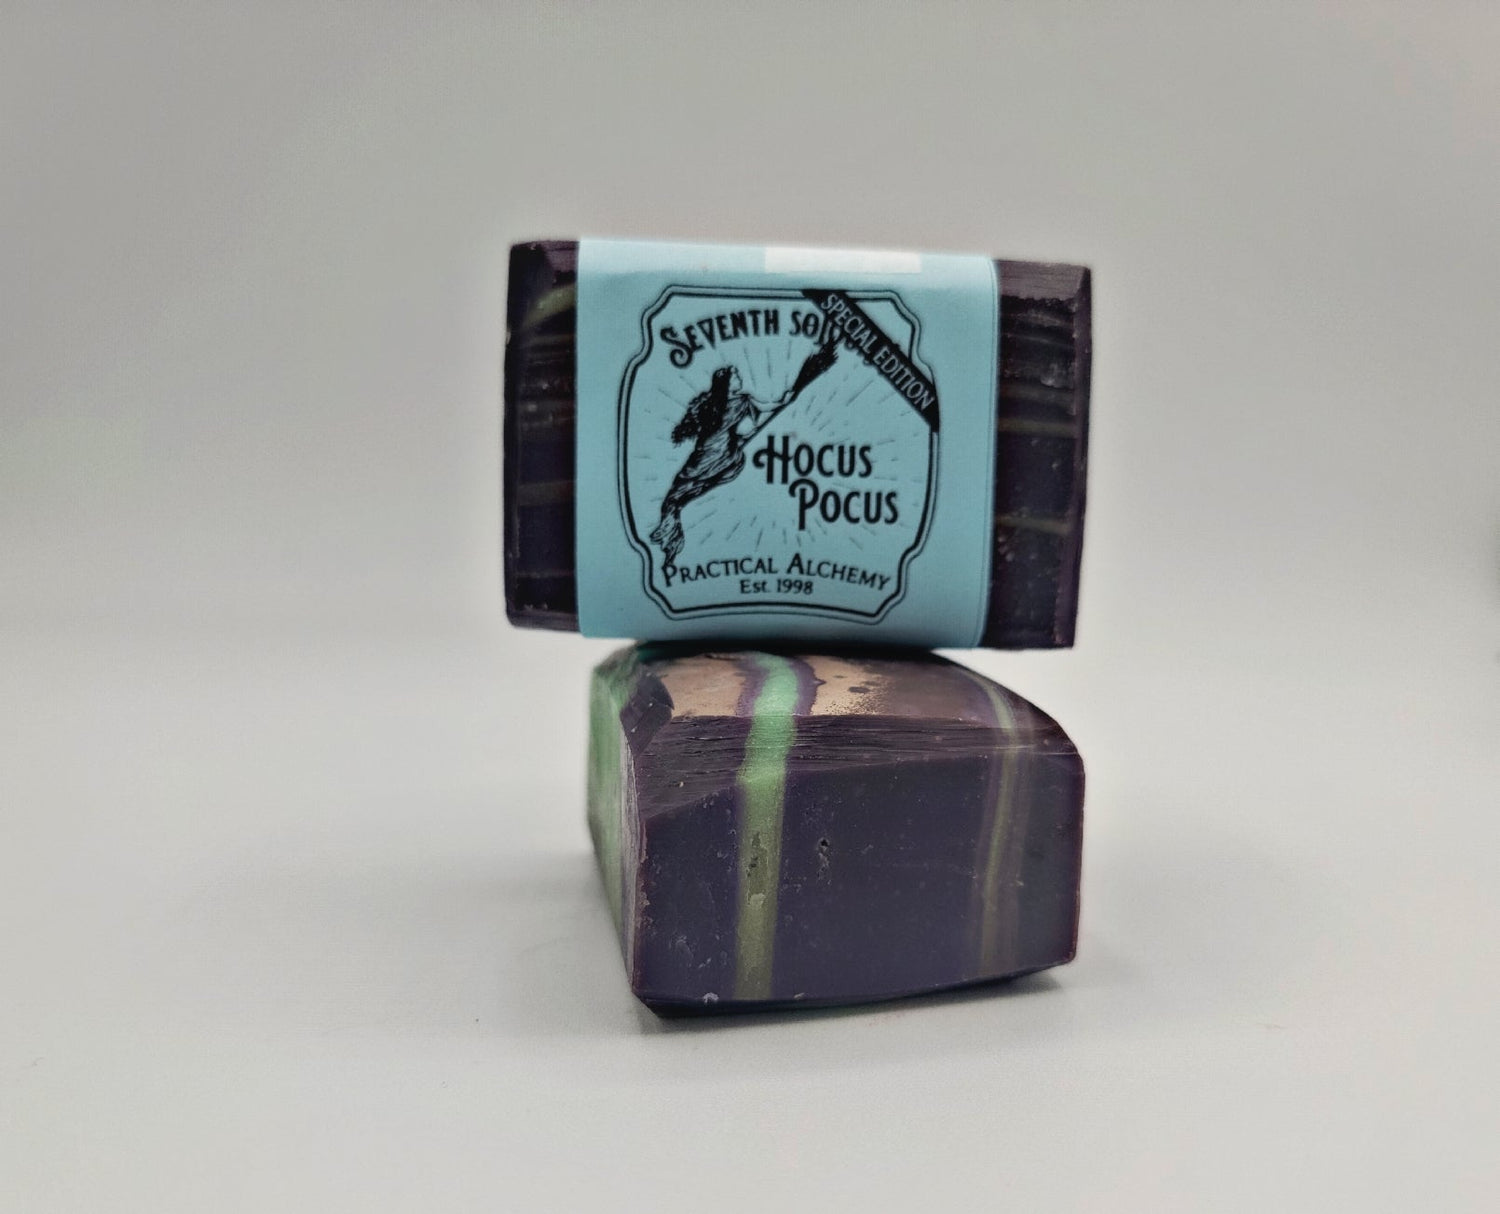 Limited Edition Soap for the Fall of 2023 by Seventh Sojourn.